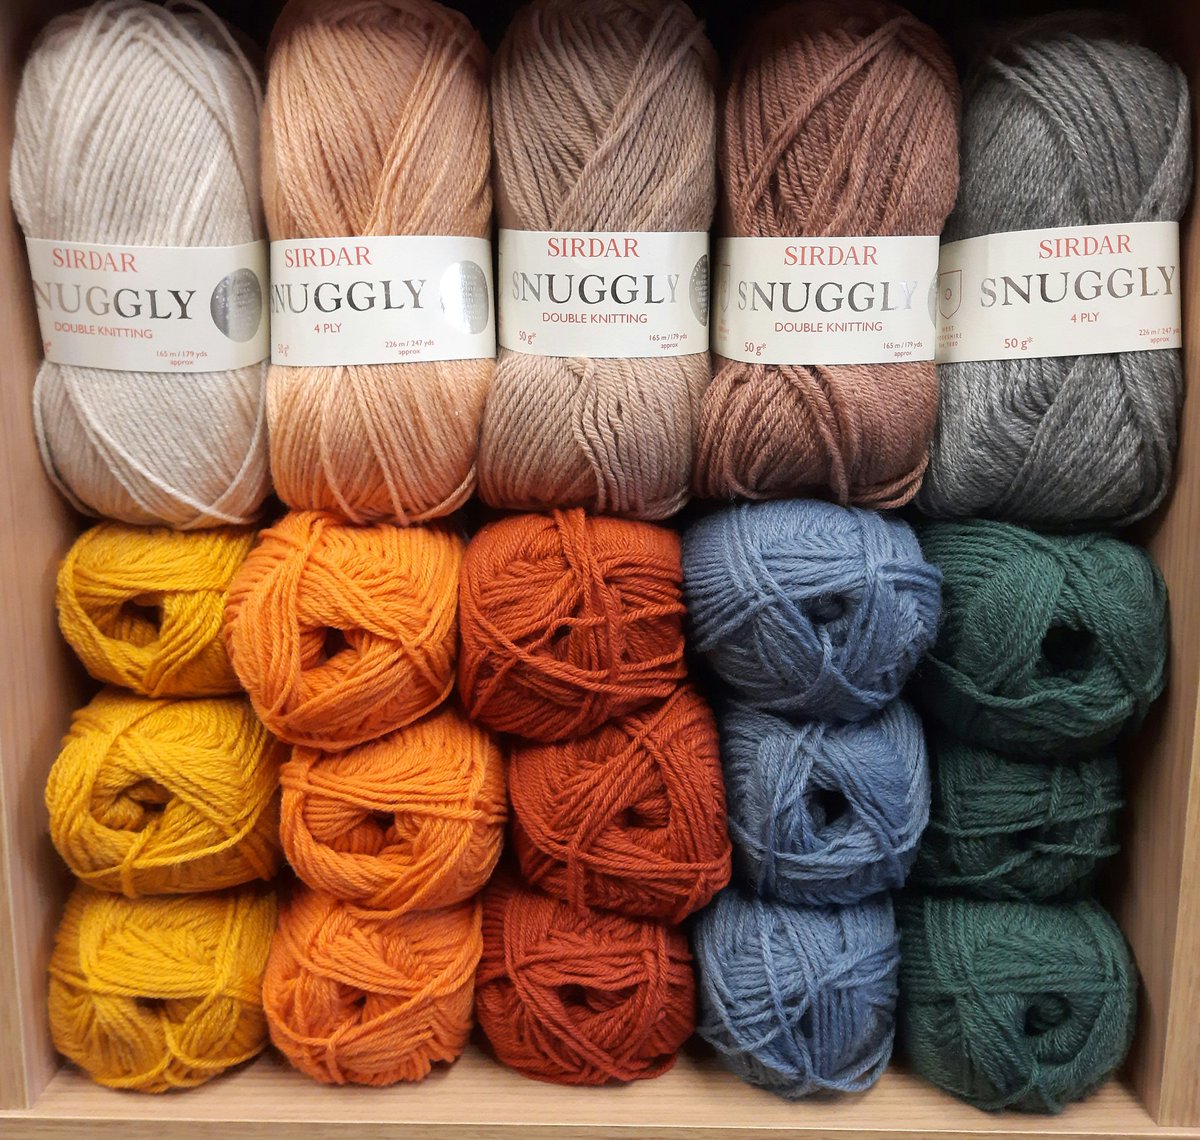 LOOK 👀 👀 👀 at all these fabulous NEW shades of Sirdar Snuggly DK 😍😍😍 #thelostsheepwoolshop #sirdar #sirdaryarns #sirdarsnuggly #sirdarsnugglydk #snugglydk #newshades #newcolours #needmoreyarn #new #knitting #crochet #snuggly